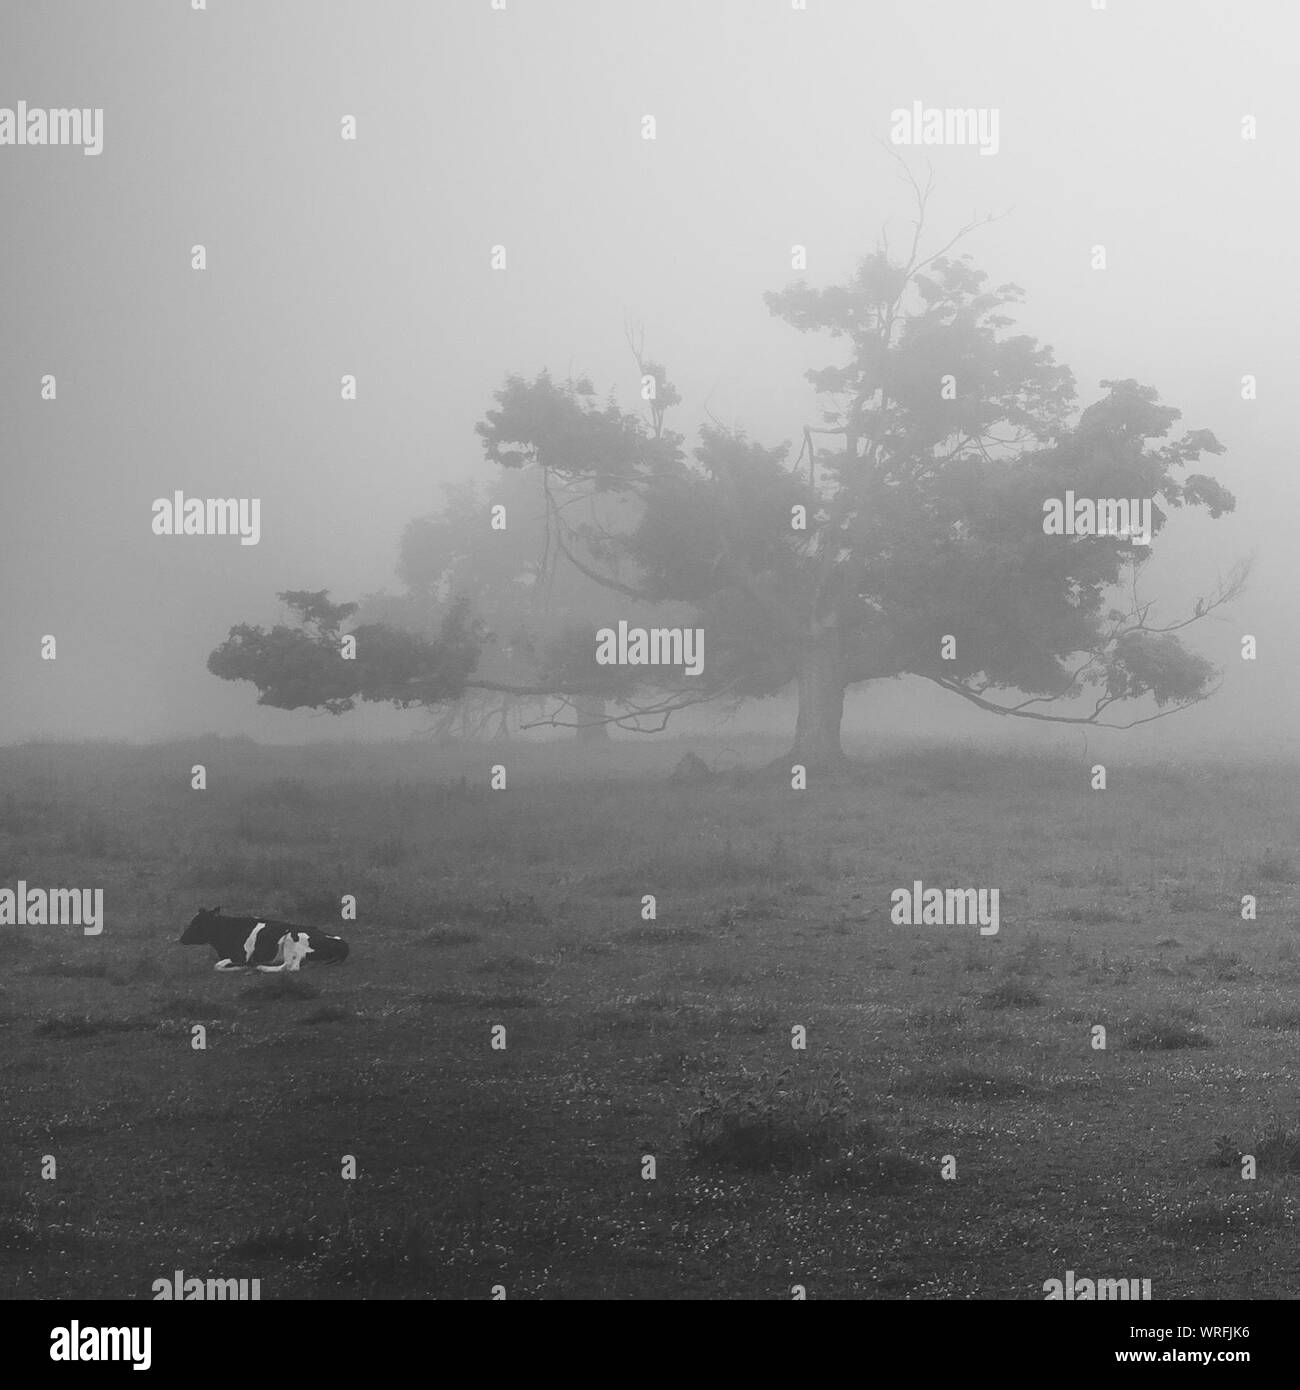 Cow Sitting On Grassy Field By Trees In Foggy Weather Stock Photo